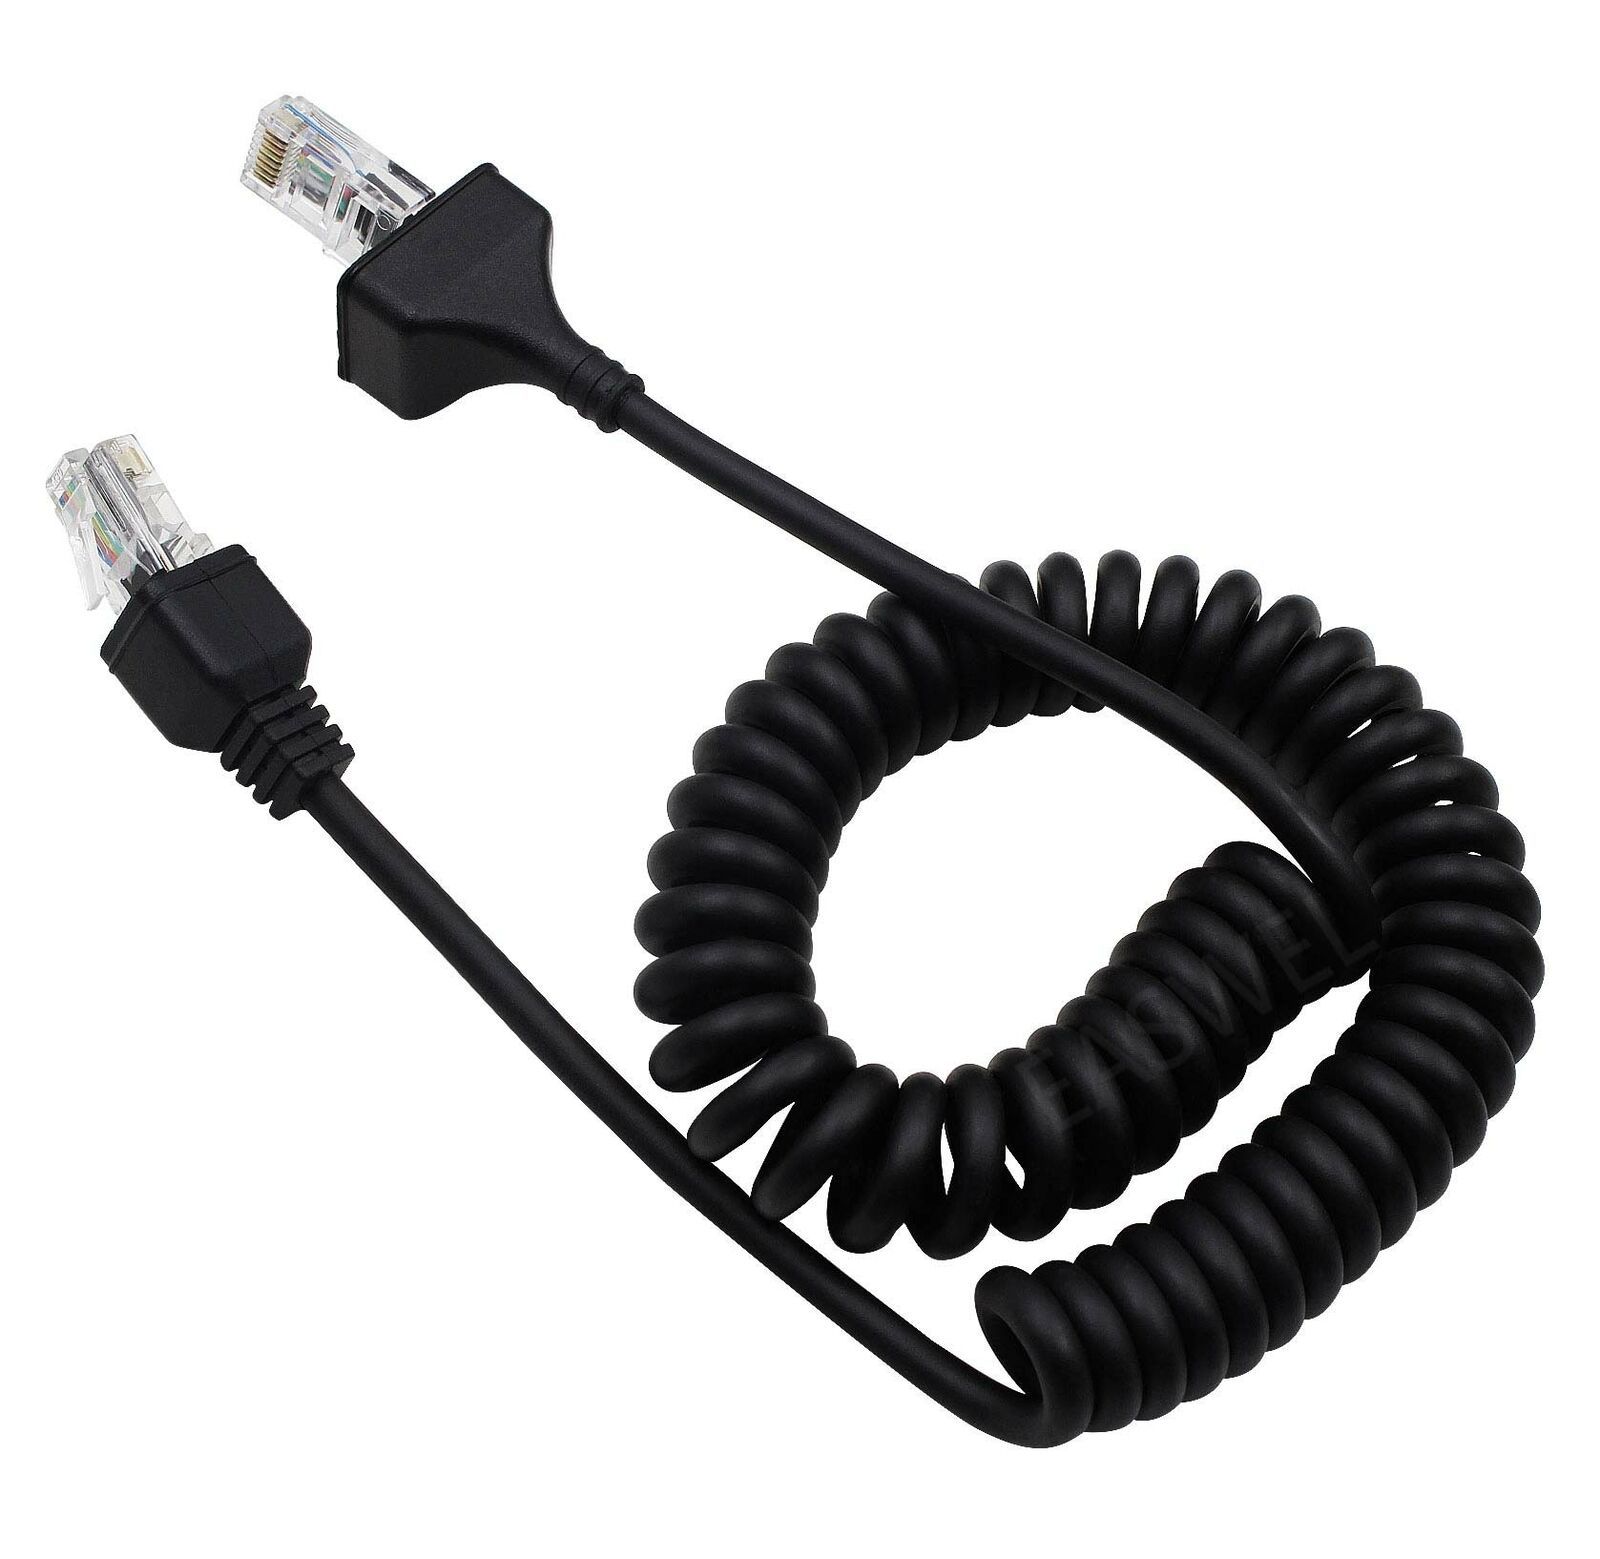 Primary image for 8PIN Mic Speaker microphone cable for Kenwood radio KMC-32 KMC-35 KMC-36 MC-59